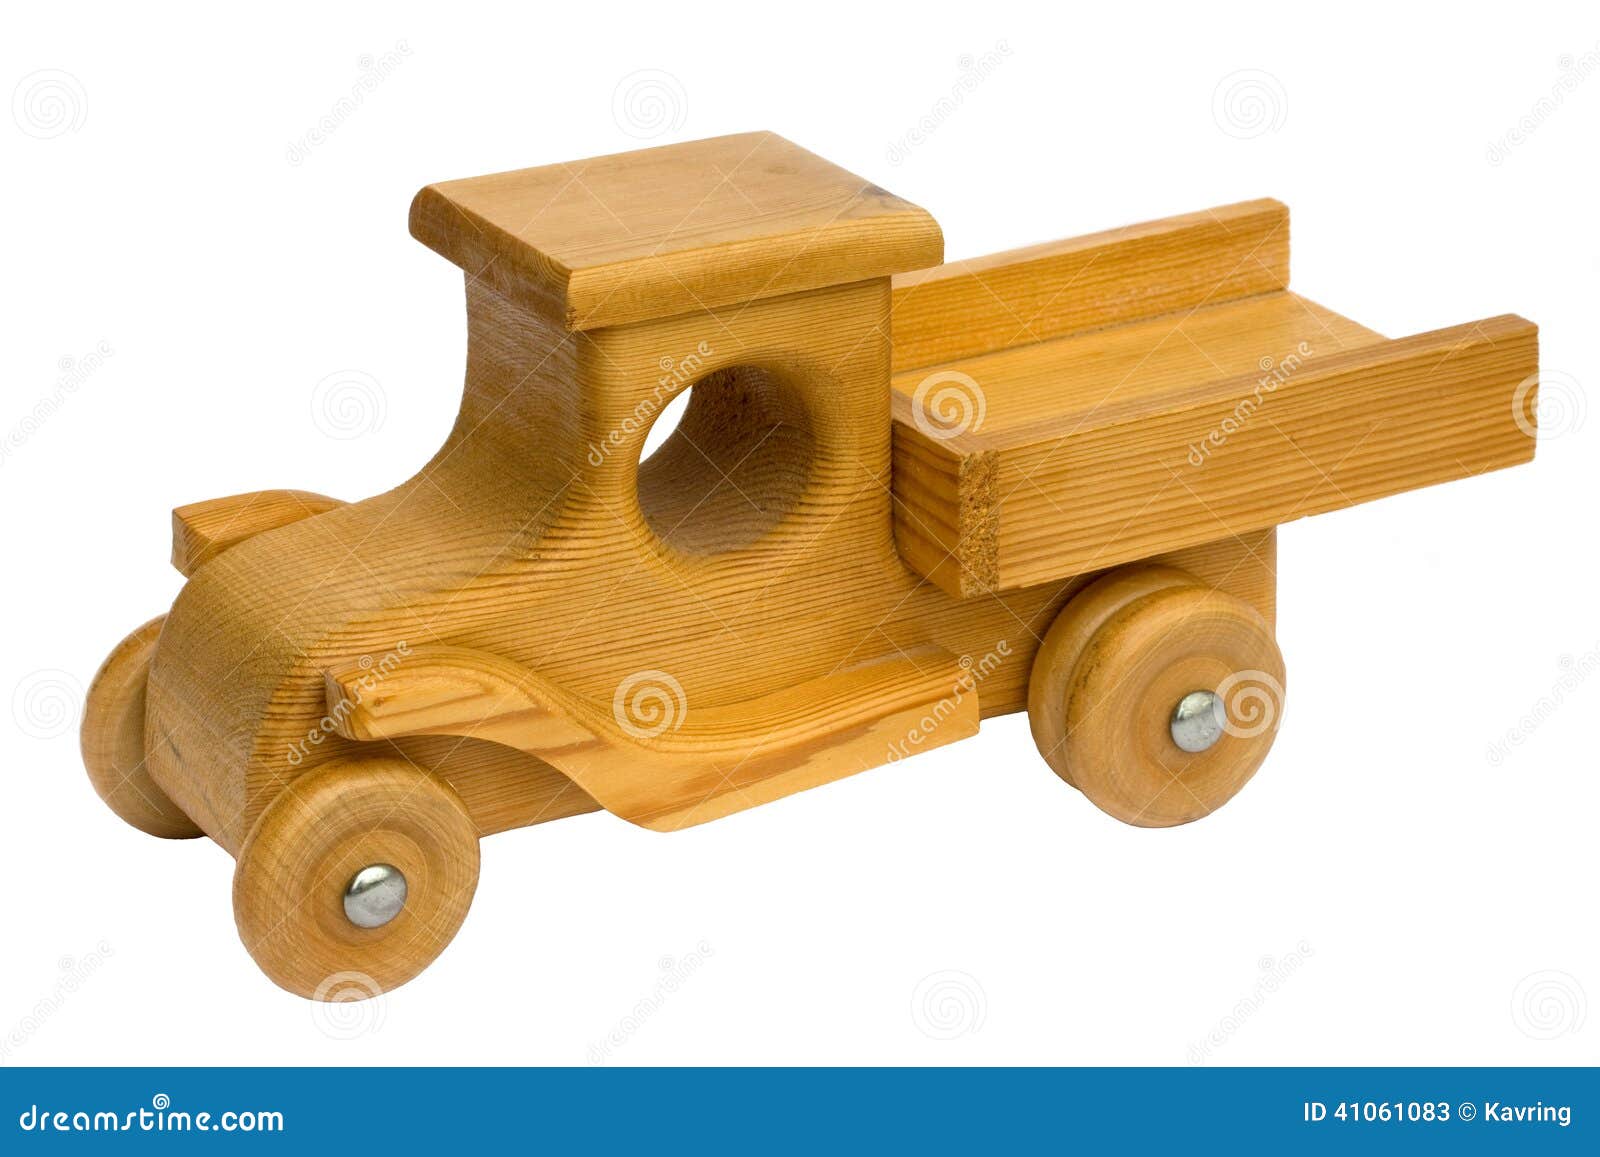 Wooden toy truck stock image. Image of natural, traffic ...